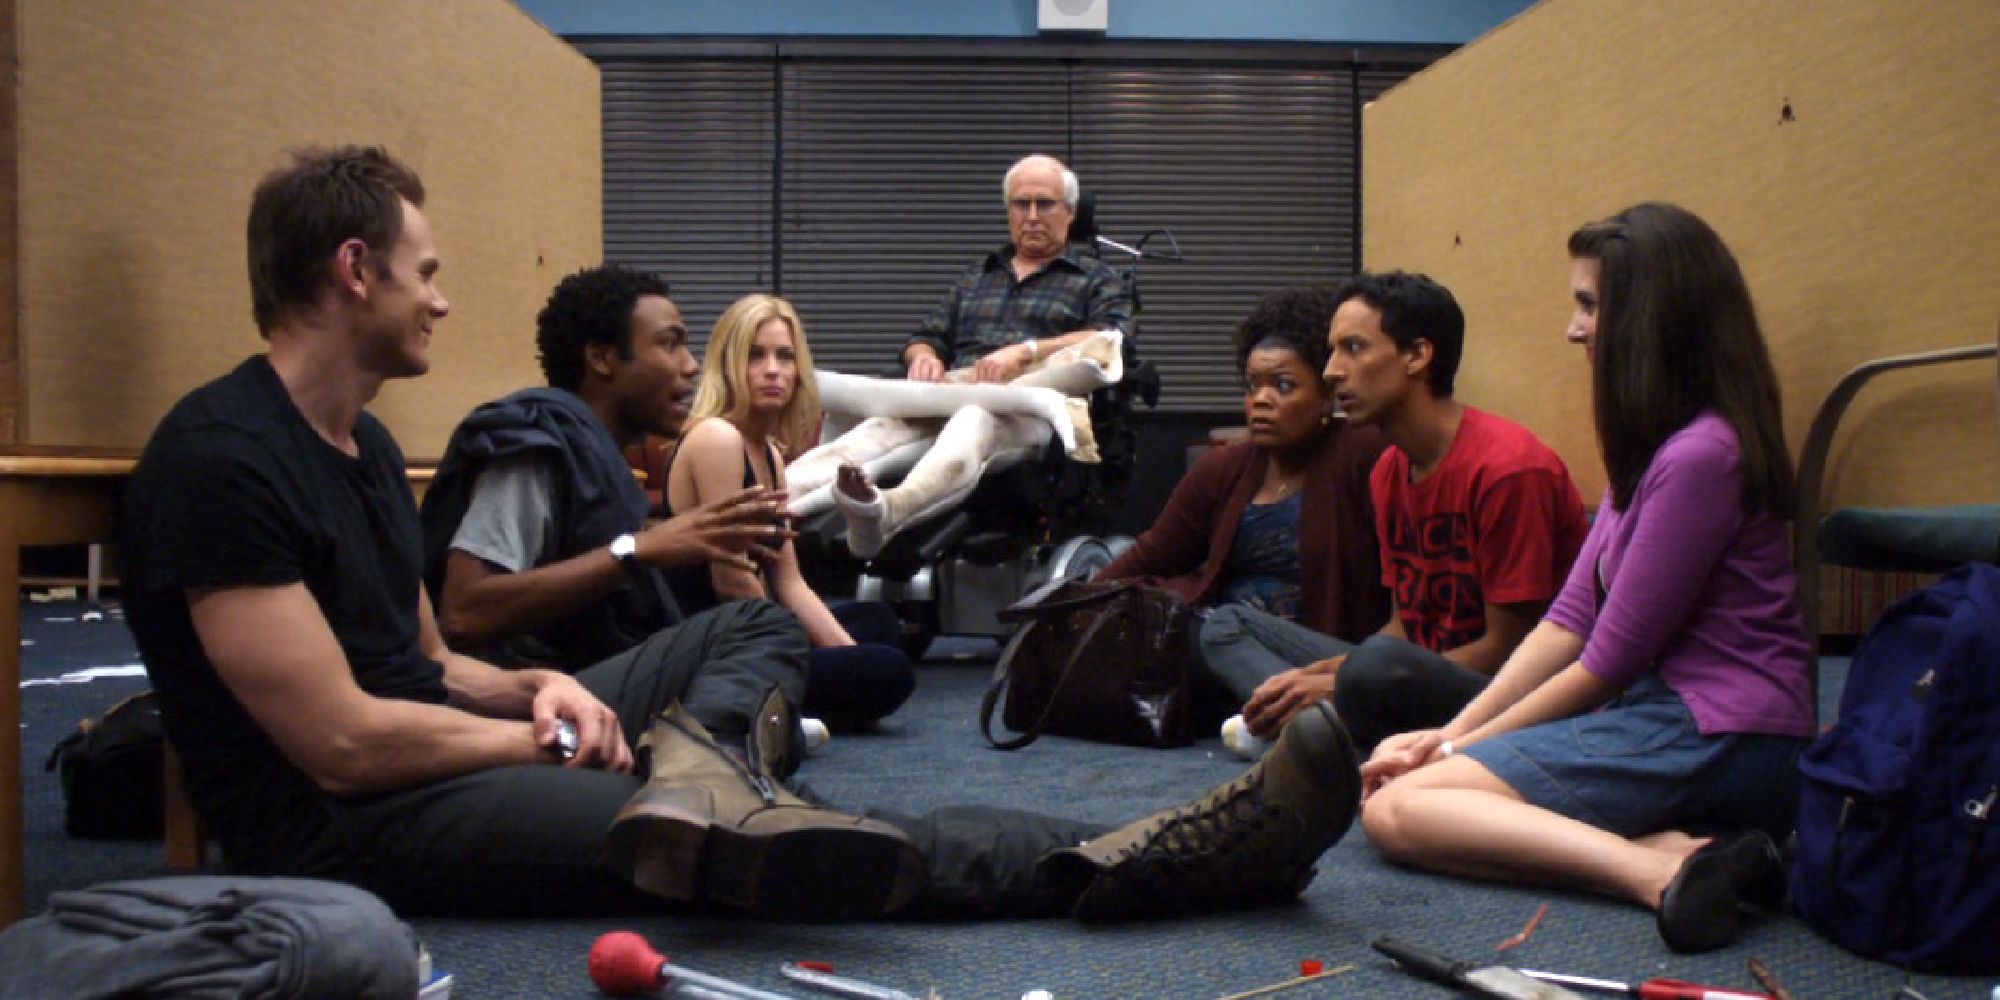 Jeff, Troy, Britta, Pierce, Shirley, Abed, and Annie sitting in a trashed study room